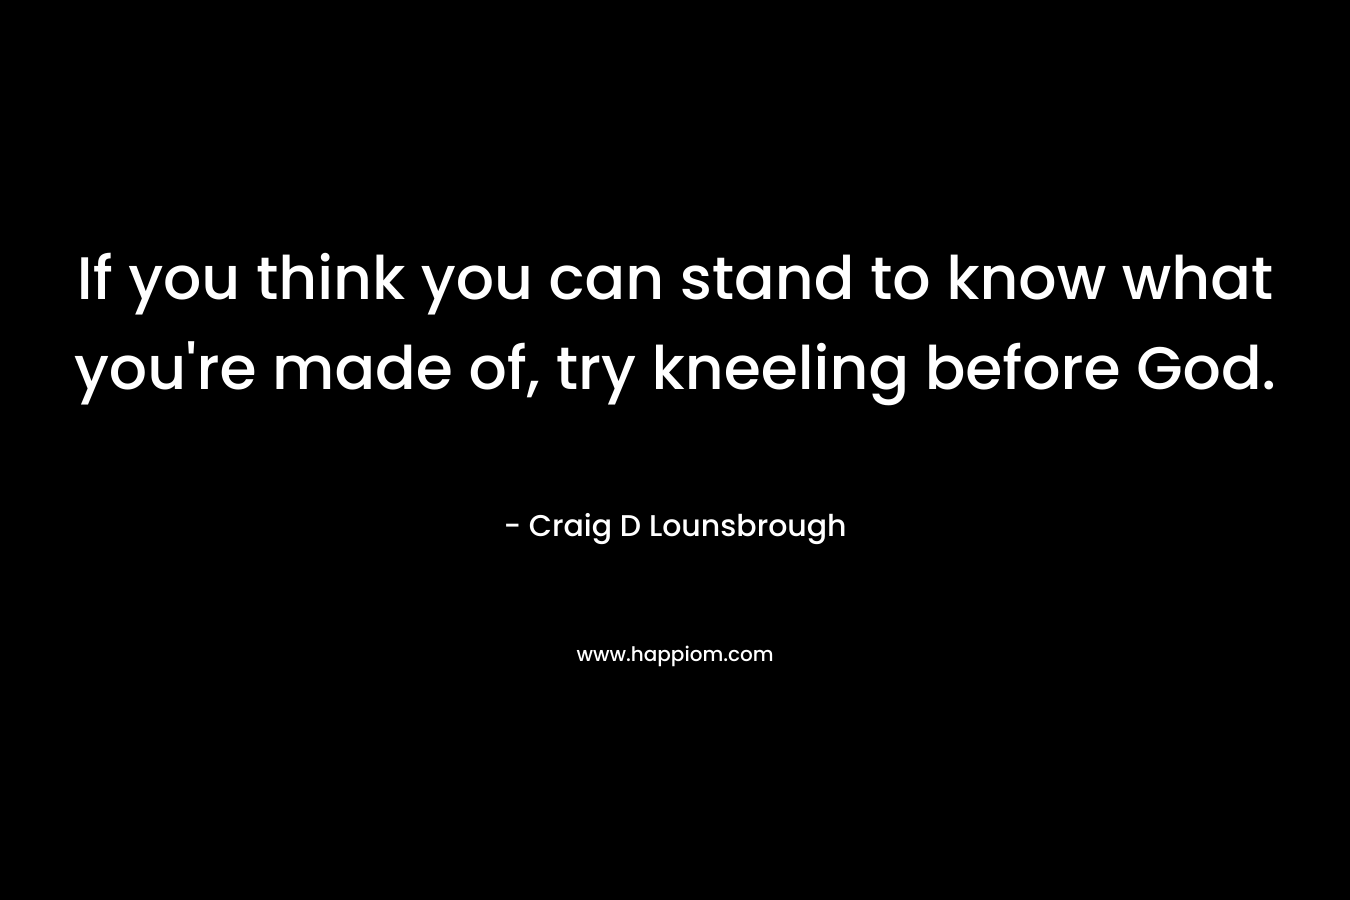 If you think you can stand to know what you're made of, try kneeling before God.